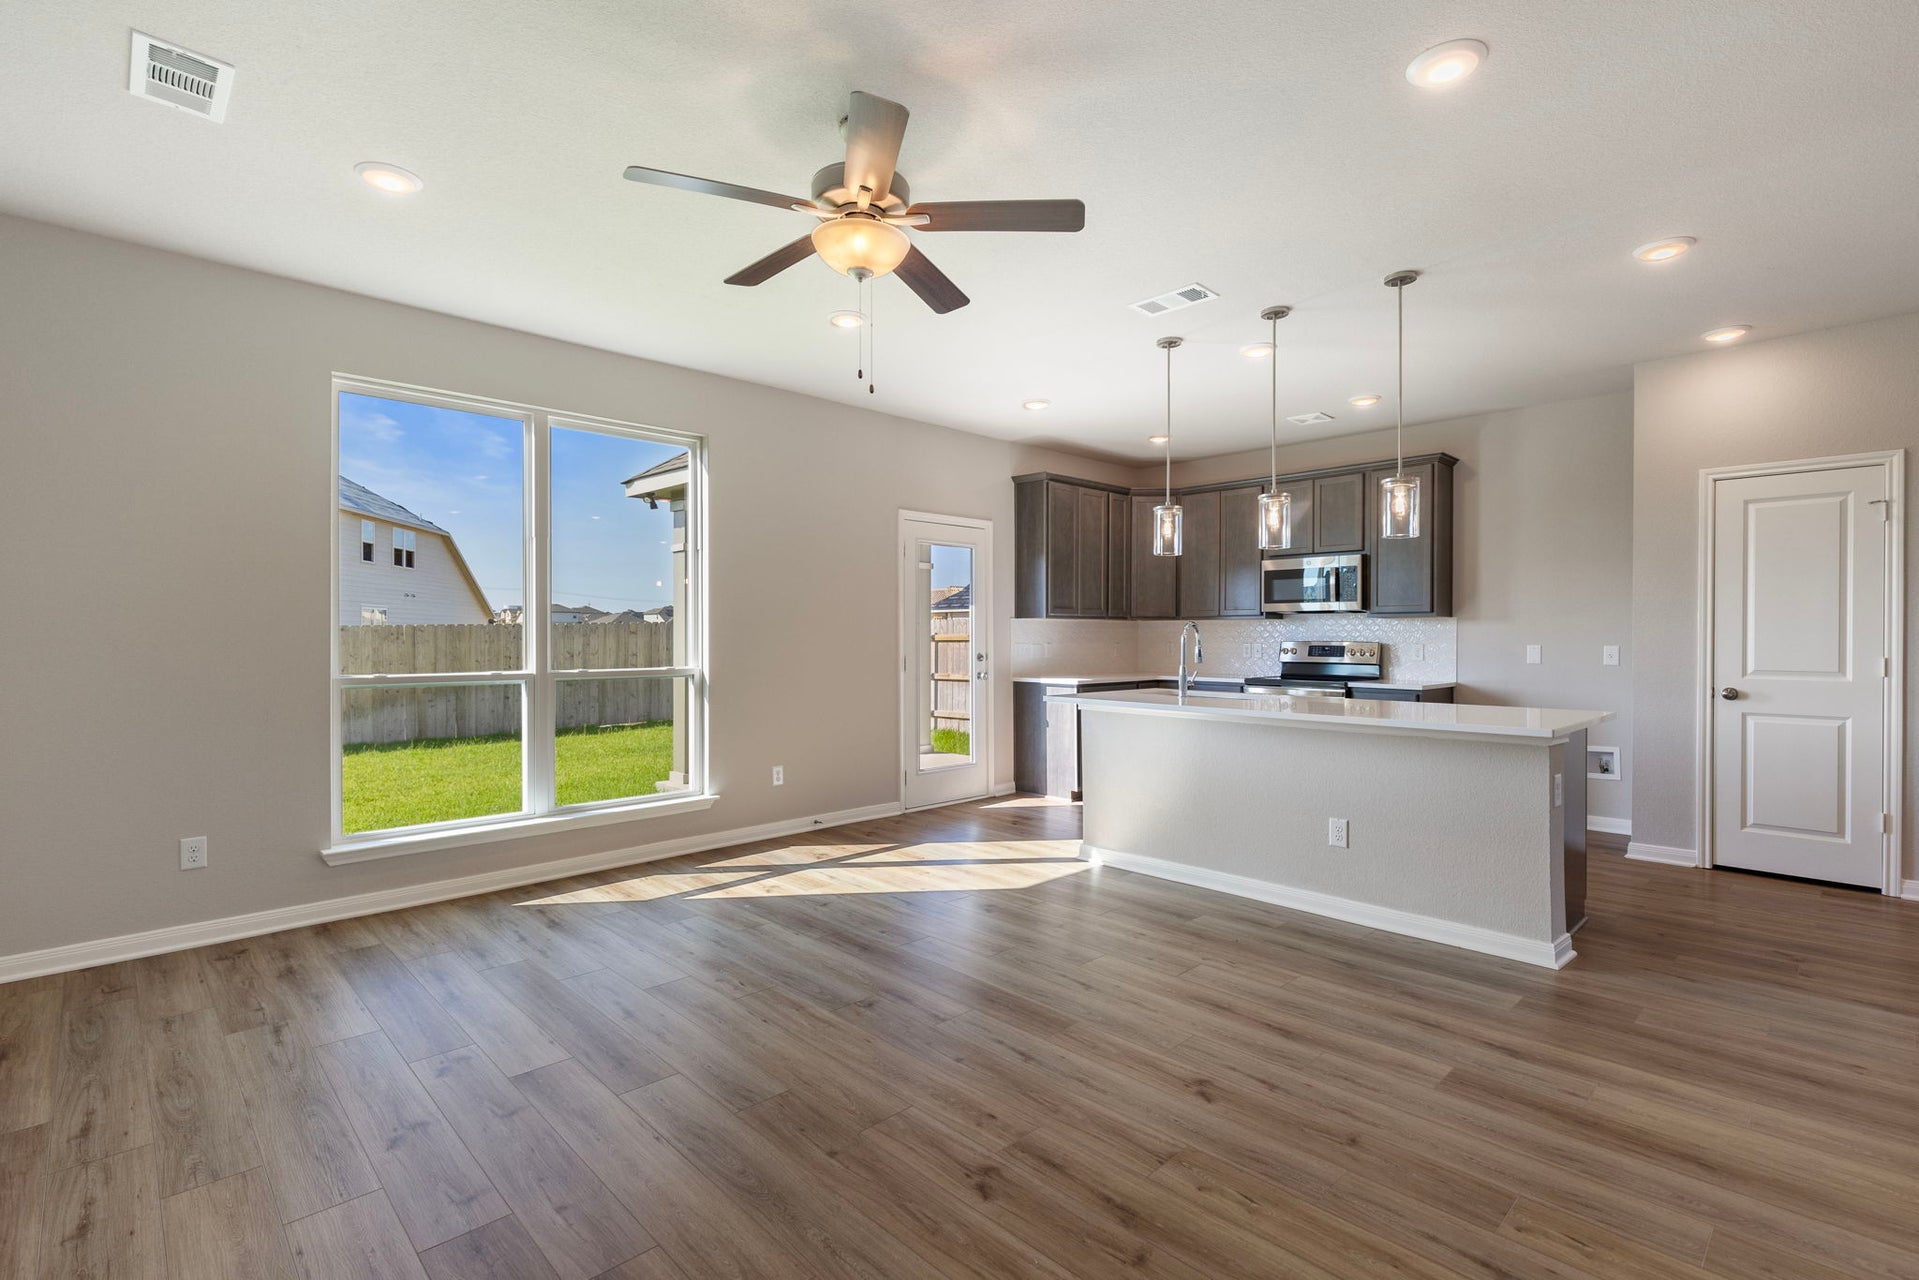 2,583sf New Home in Lorena, TX